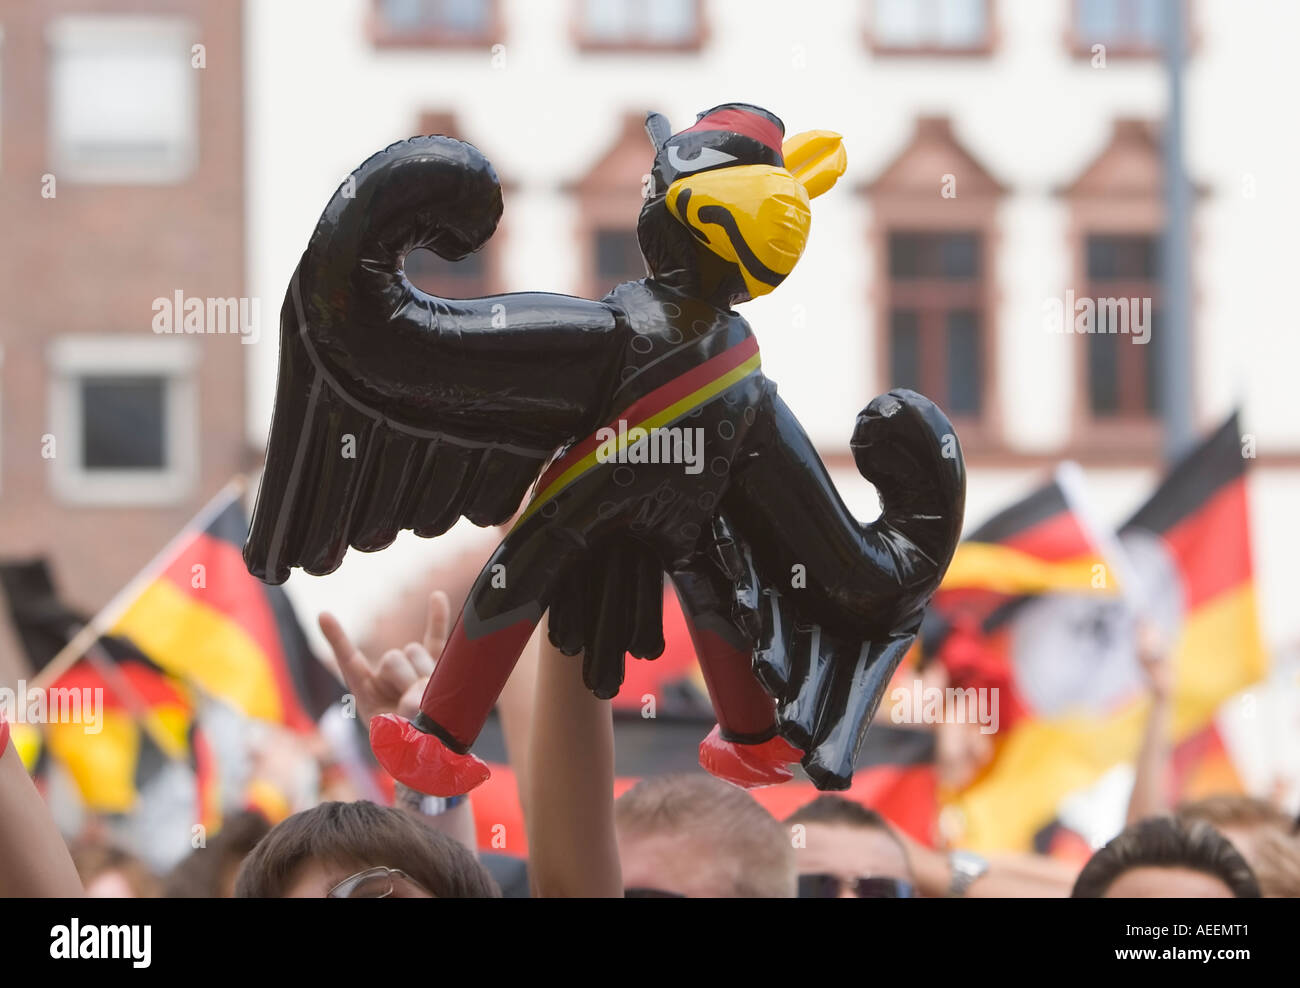 German football fans holding up an inflatable eagle during the world cup match Germany vs Sweden (2:0) at a public viewing event Stock Photo